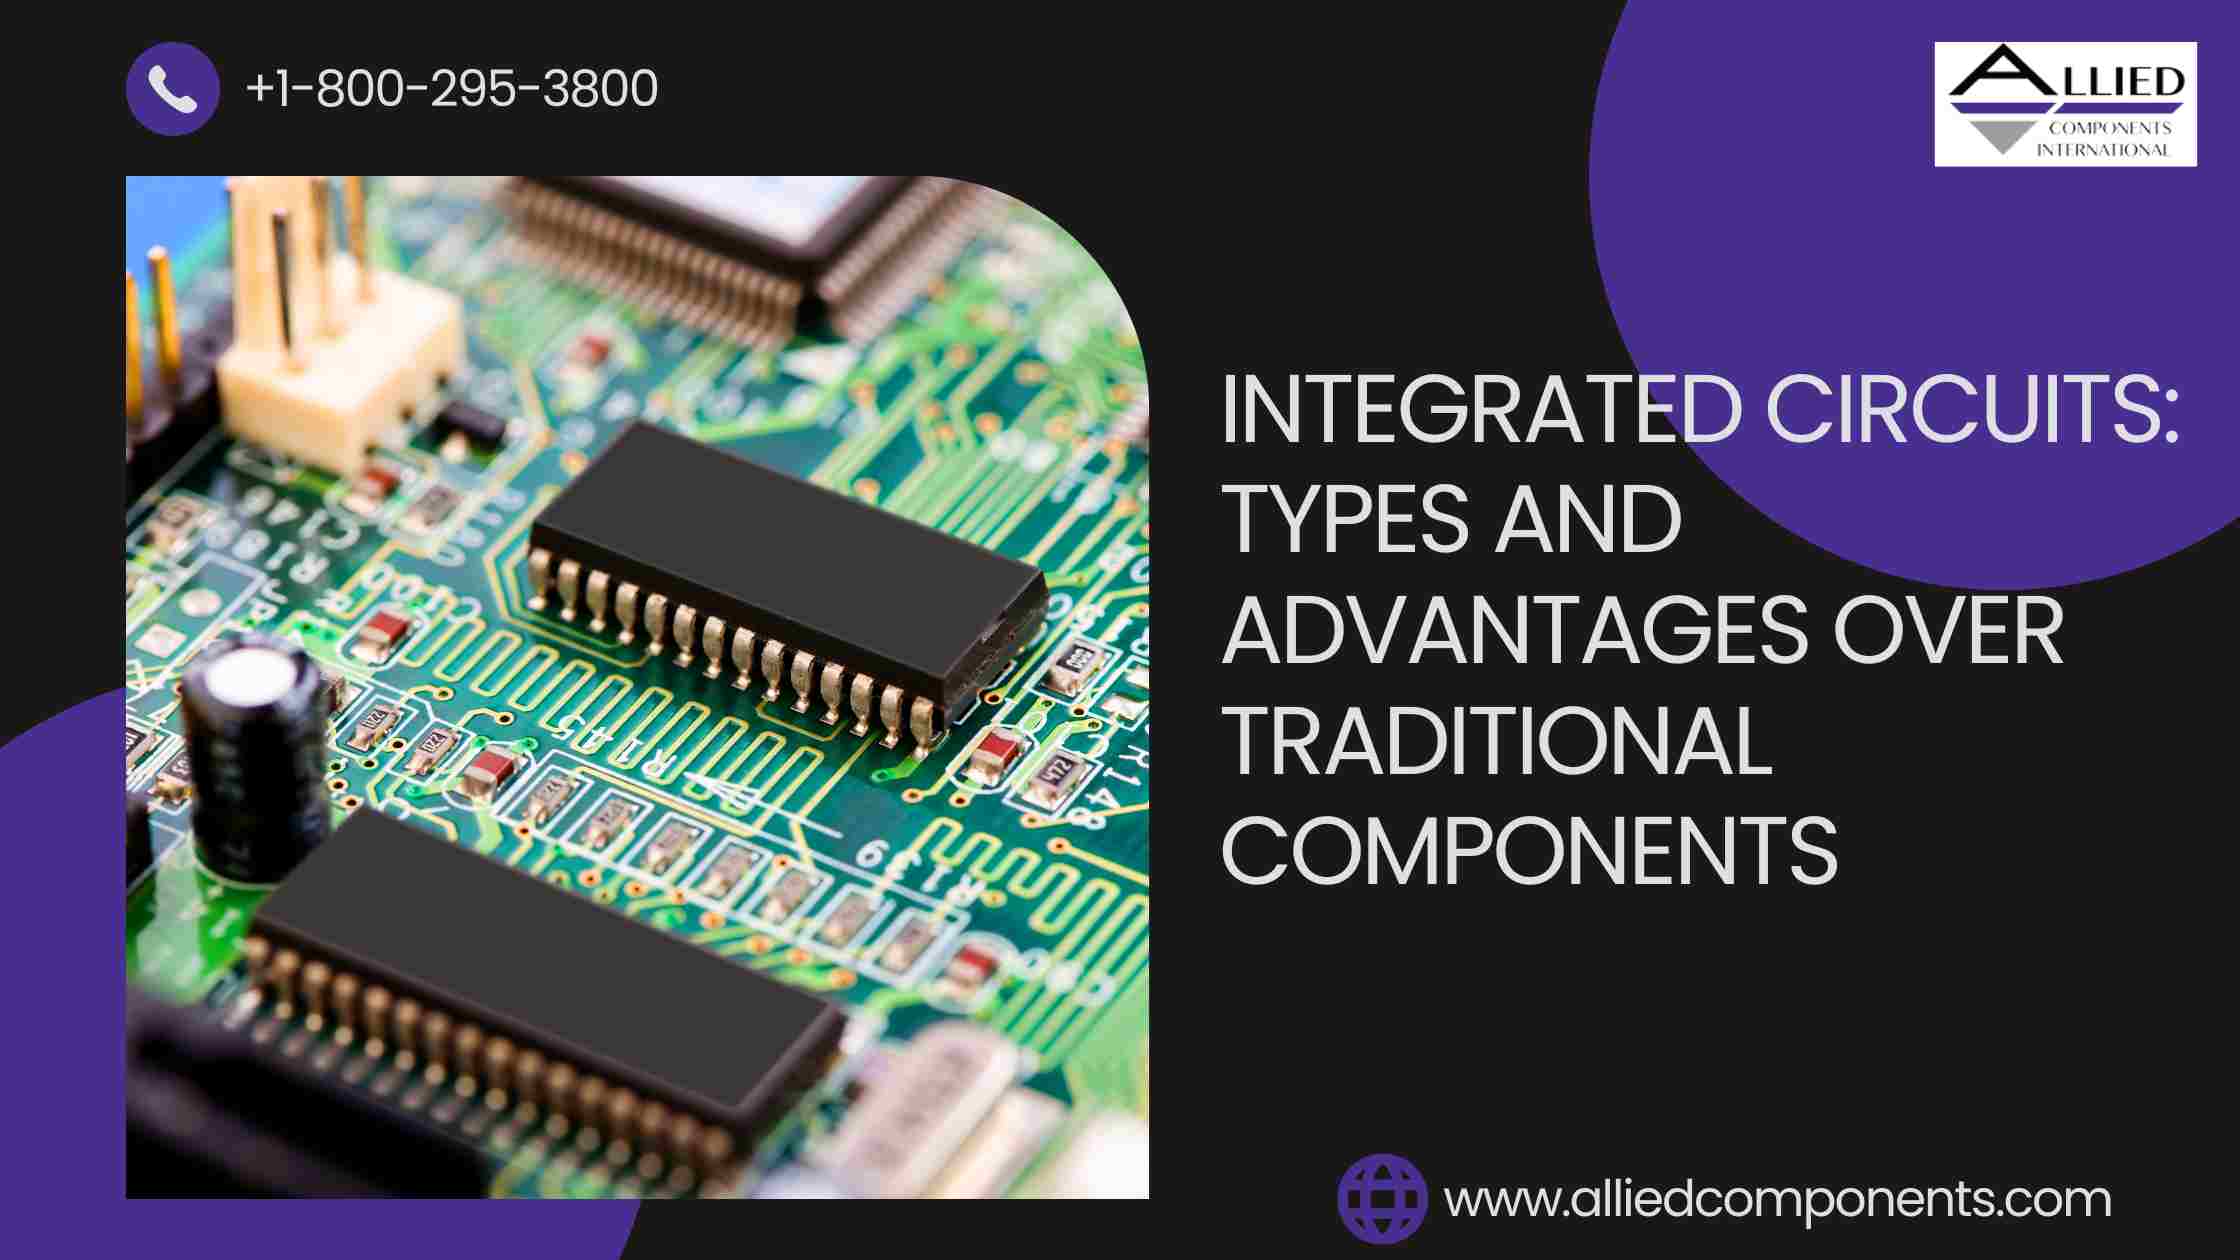 Integrated Circuits: Types and Advantages Over Traditional Components